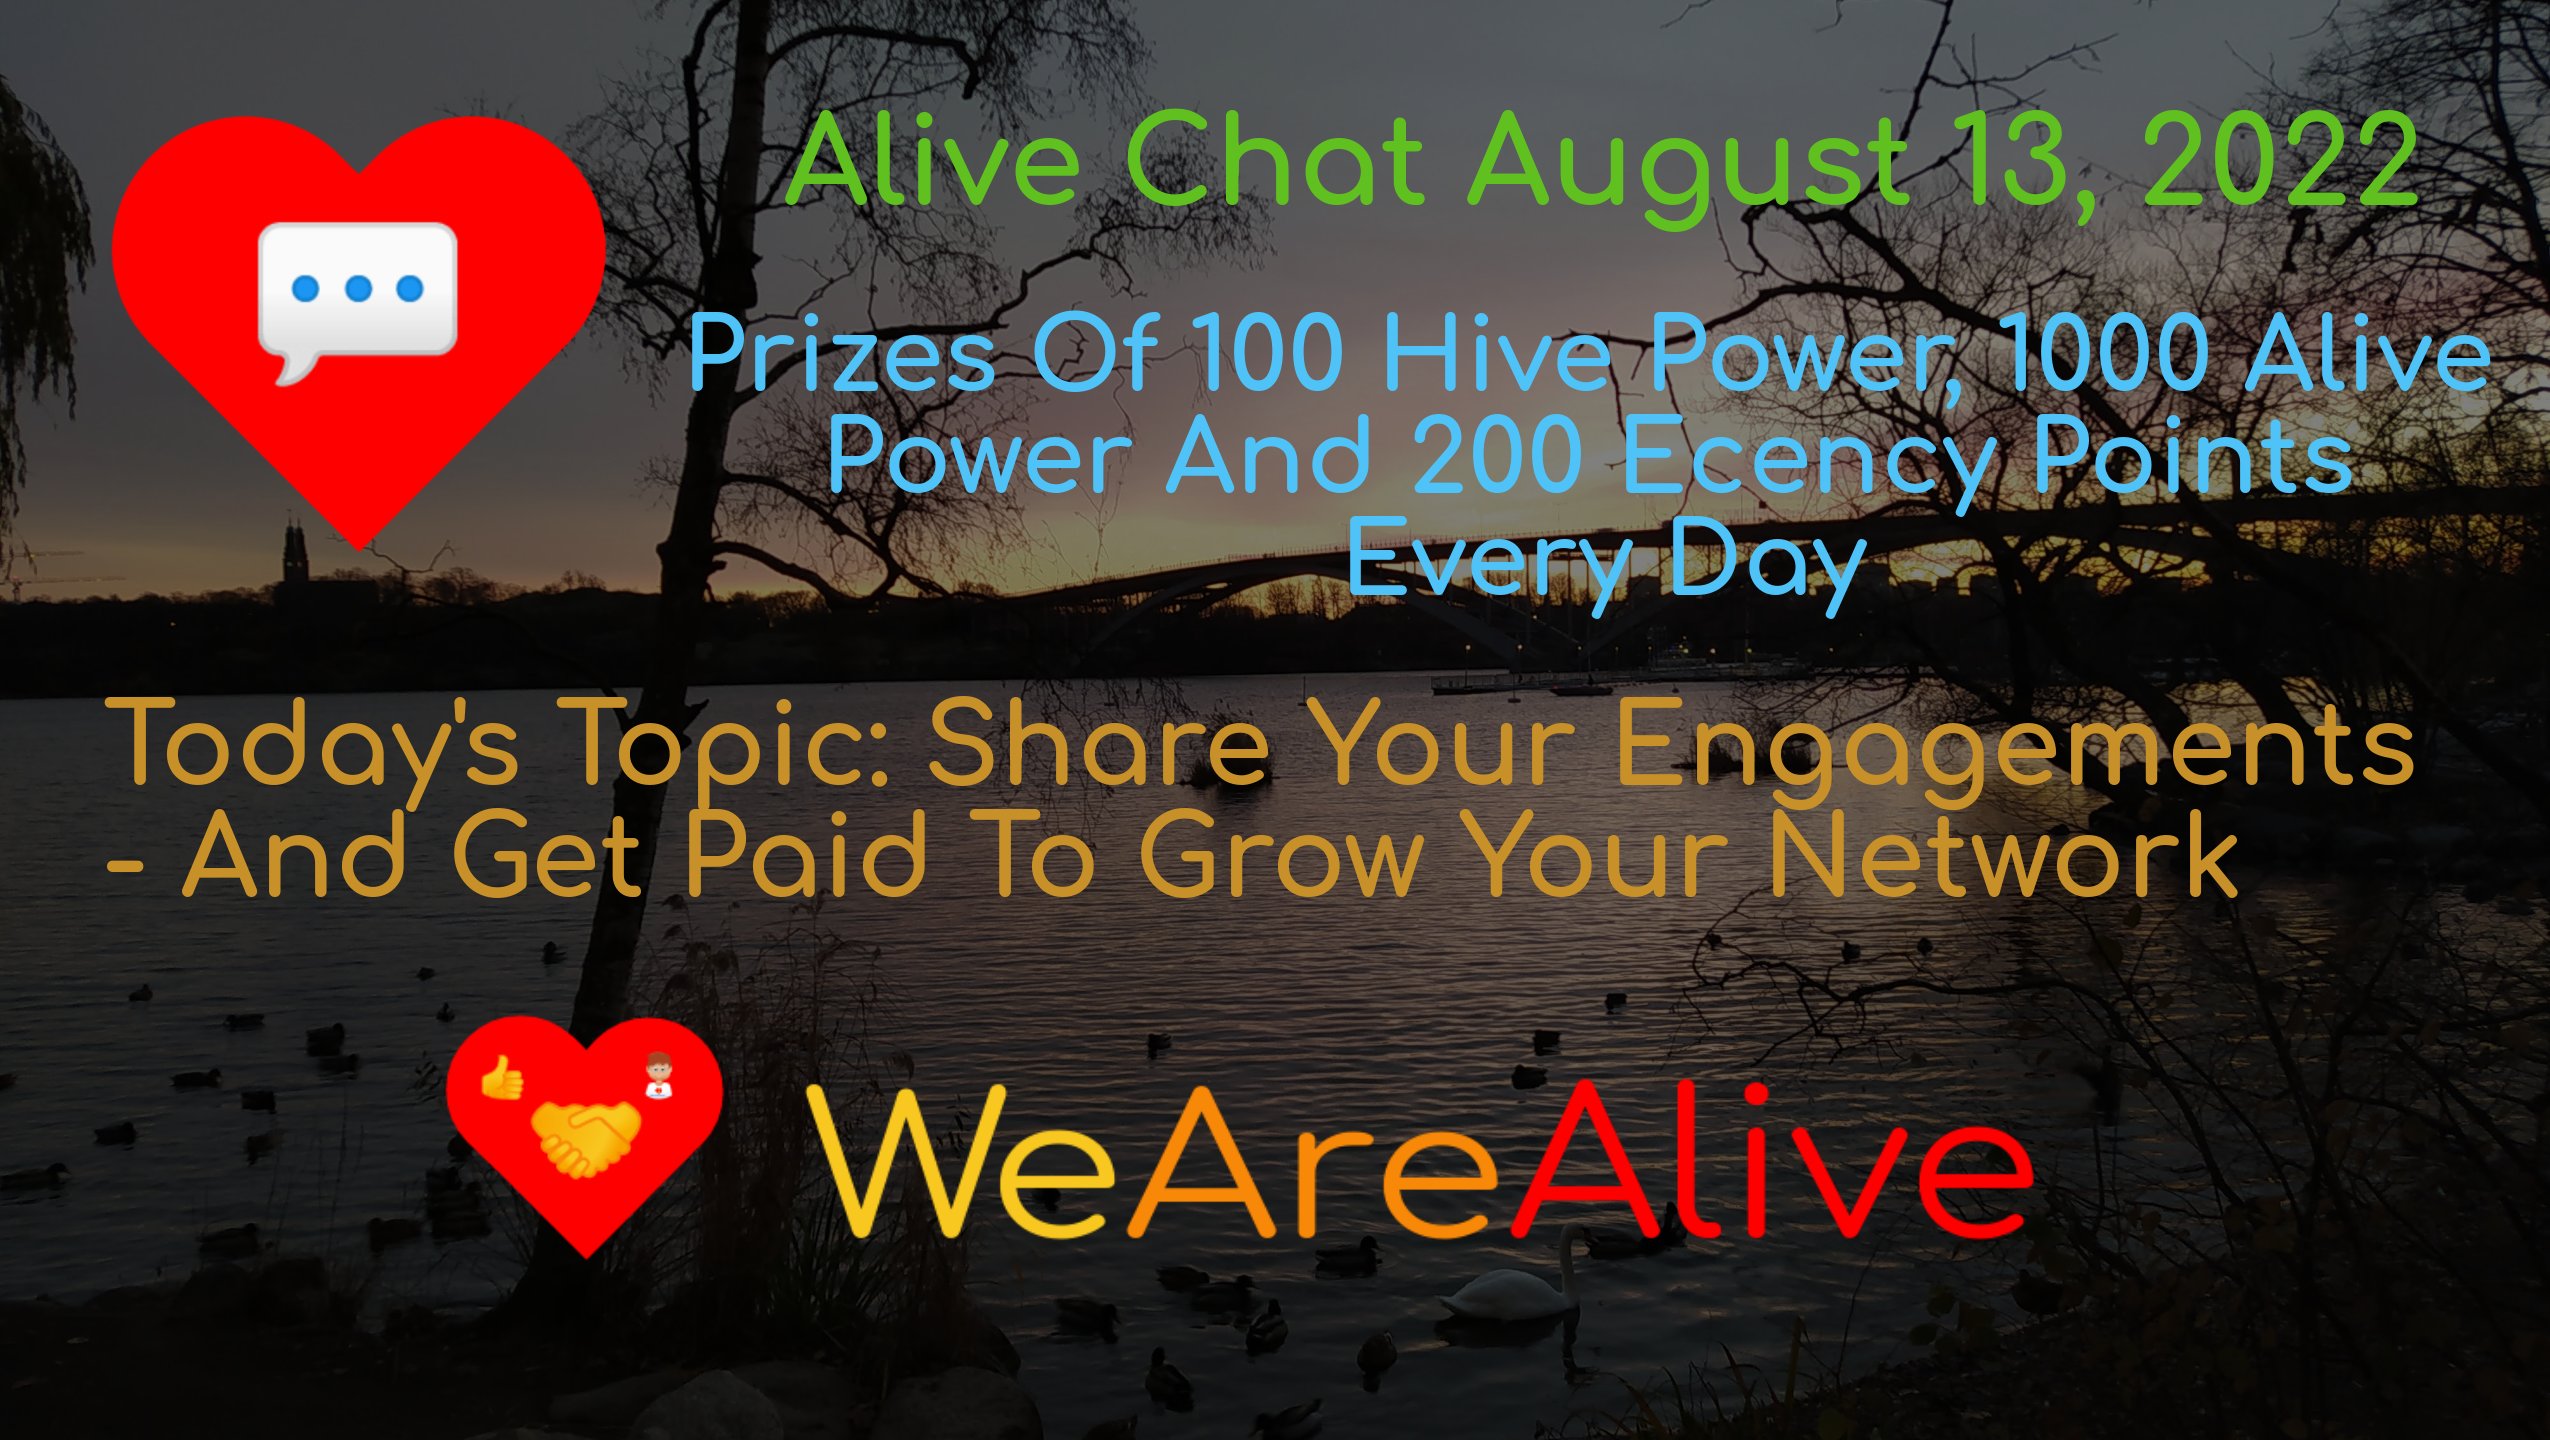 @alive.chat/alive-chat-august-13-2022-daily-prize-drawing-open-for-entries-todays-topic-share-your-engagements-and-get-paid-to-grow-your-n